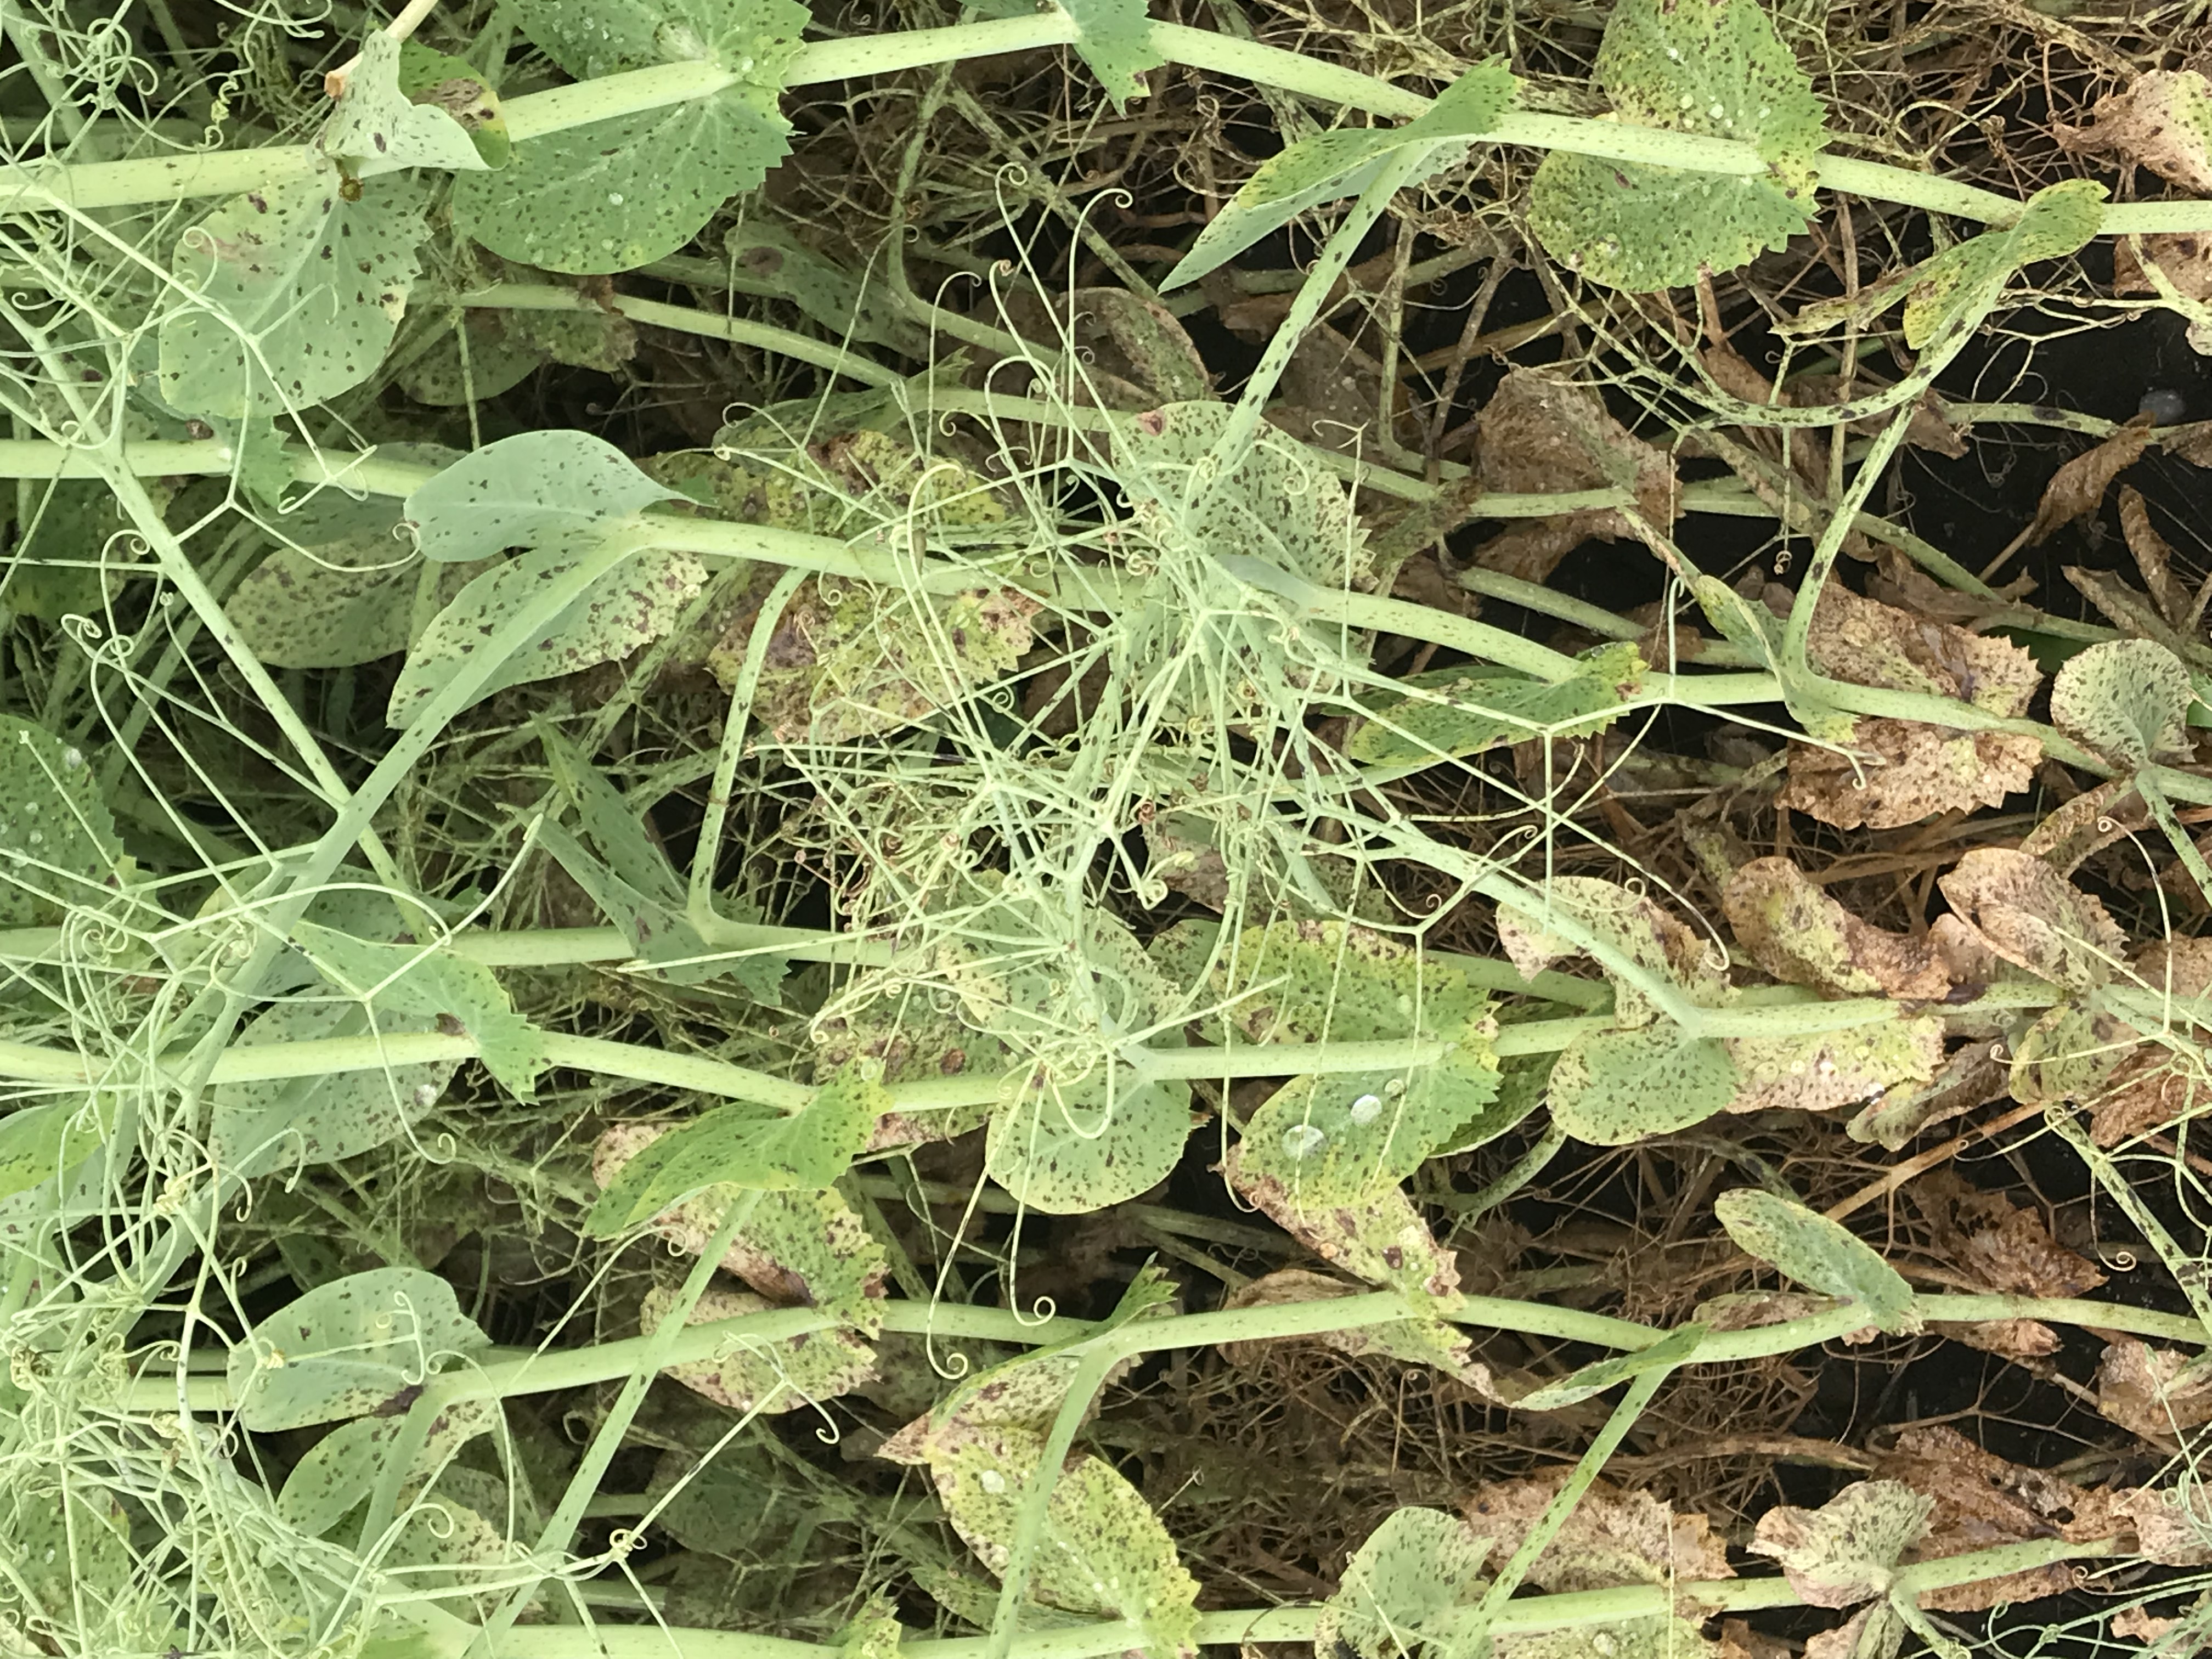 Photo showing high levels of bacterial blight infections were observed on field pea plants.